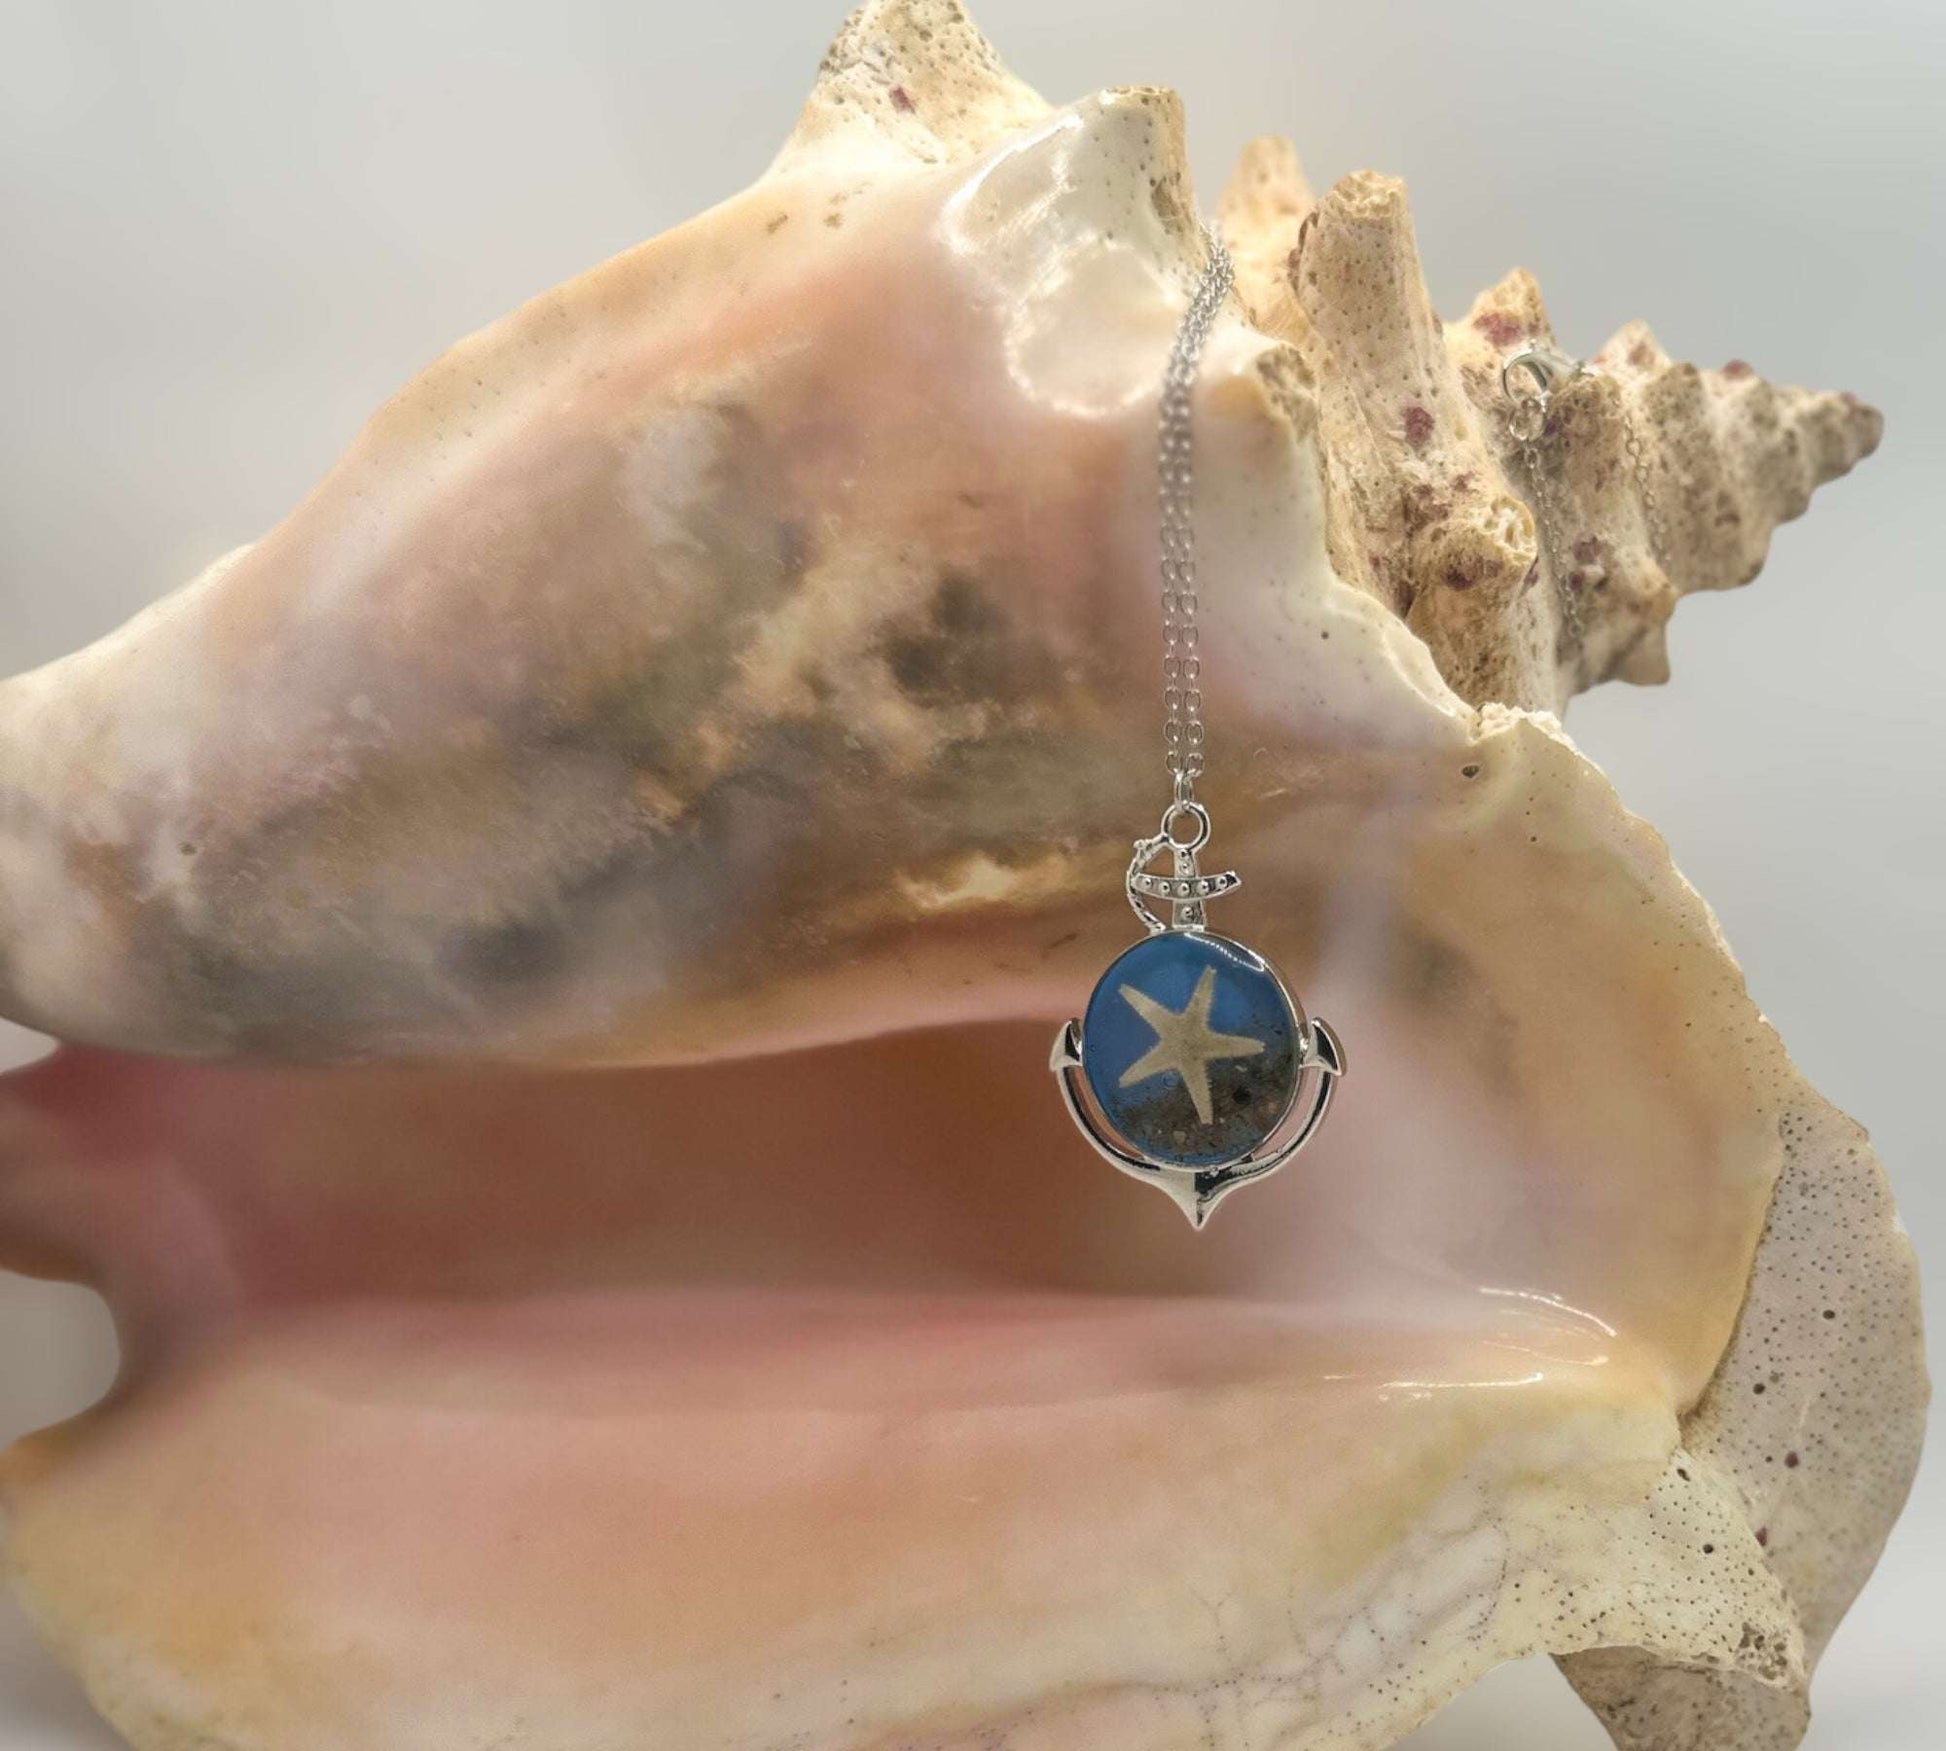 Anchors Away: Ocean-Inspired Pendants with Real Seashells & Sand